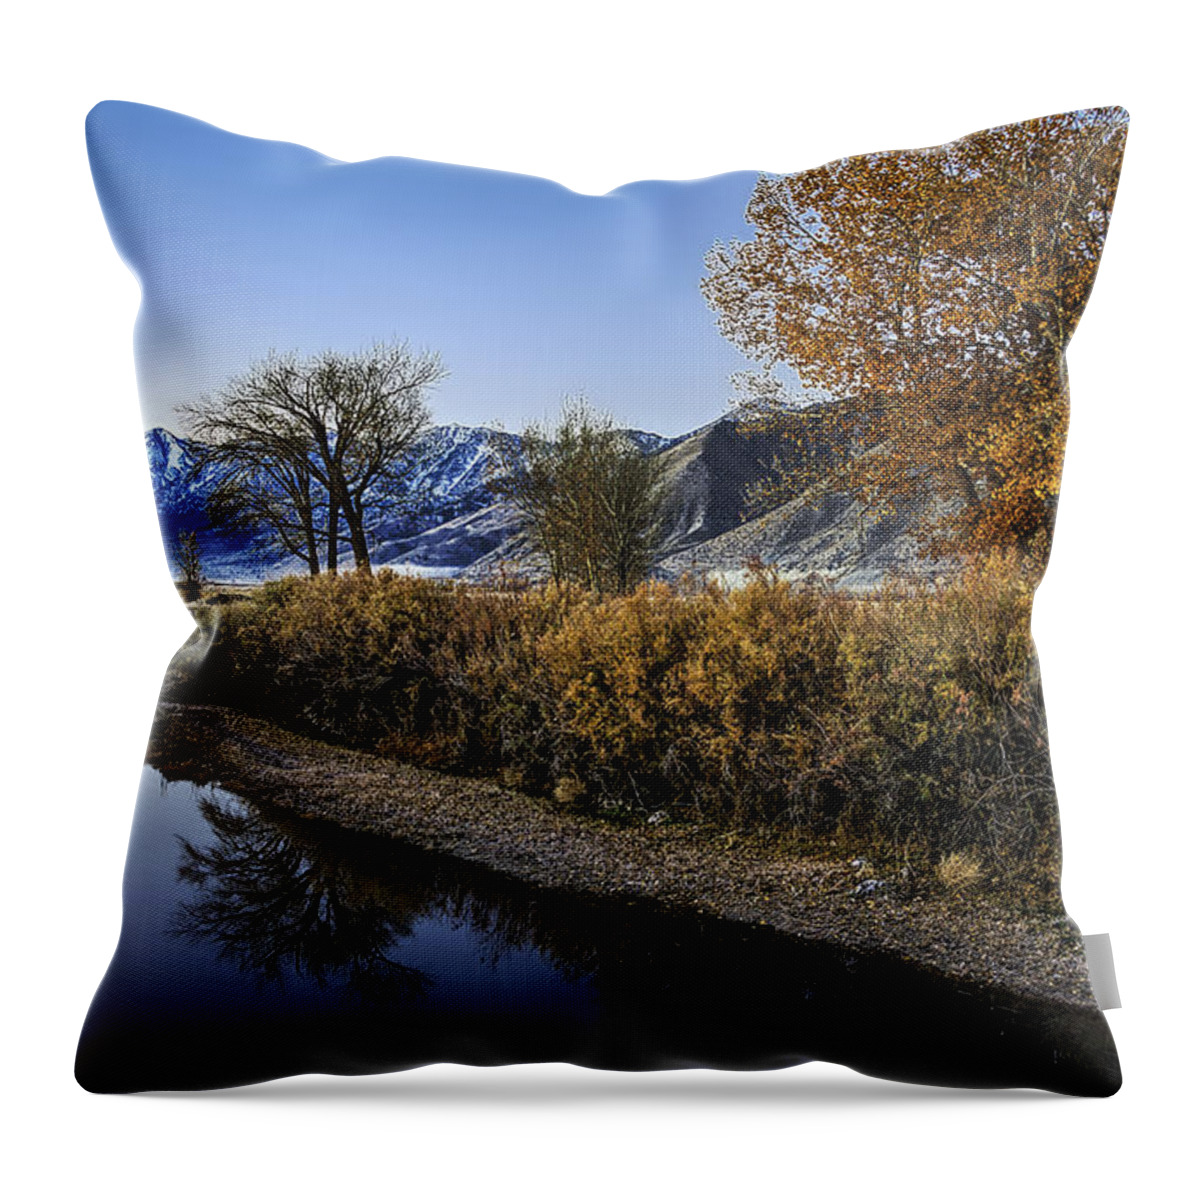 Blue Throw Pillow featuring the photograph Forebearance by Maria Coulson